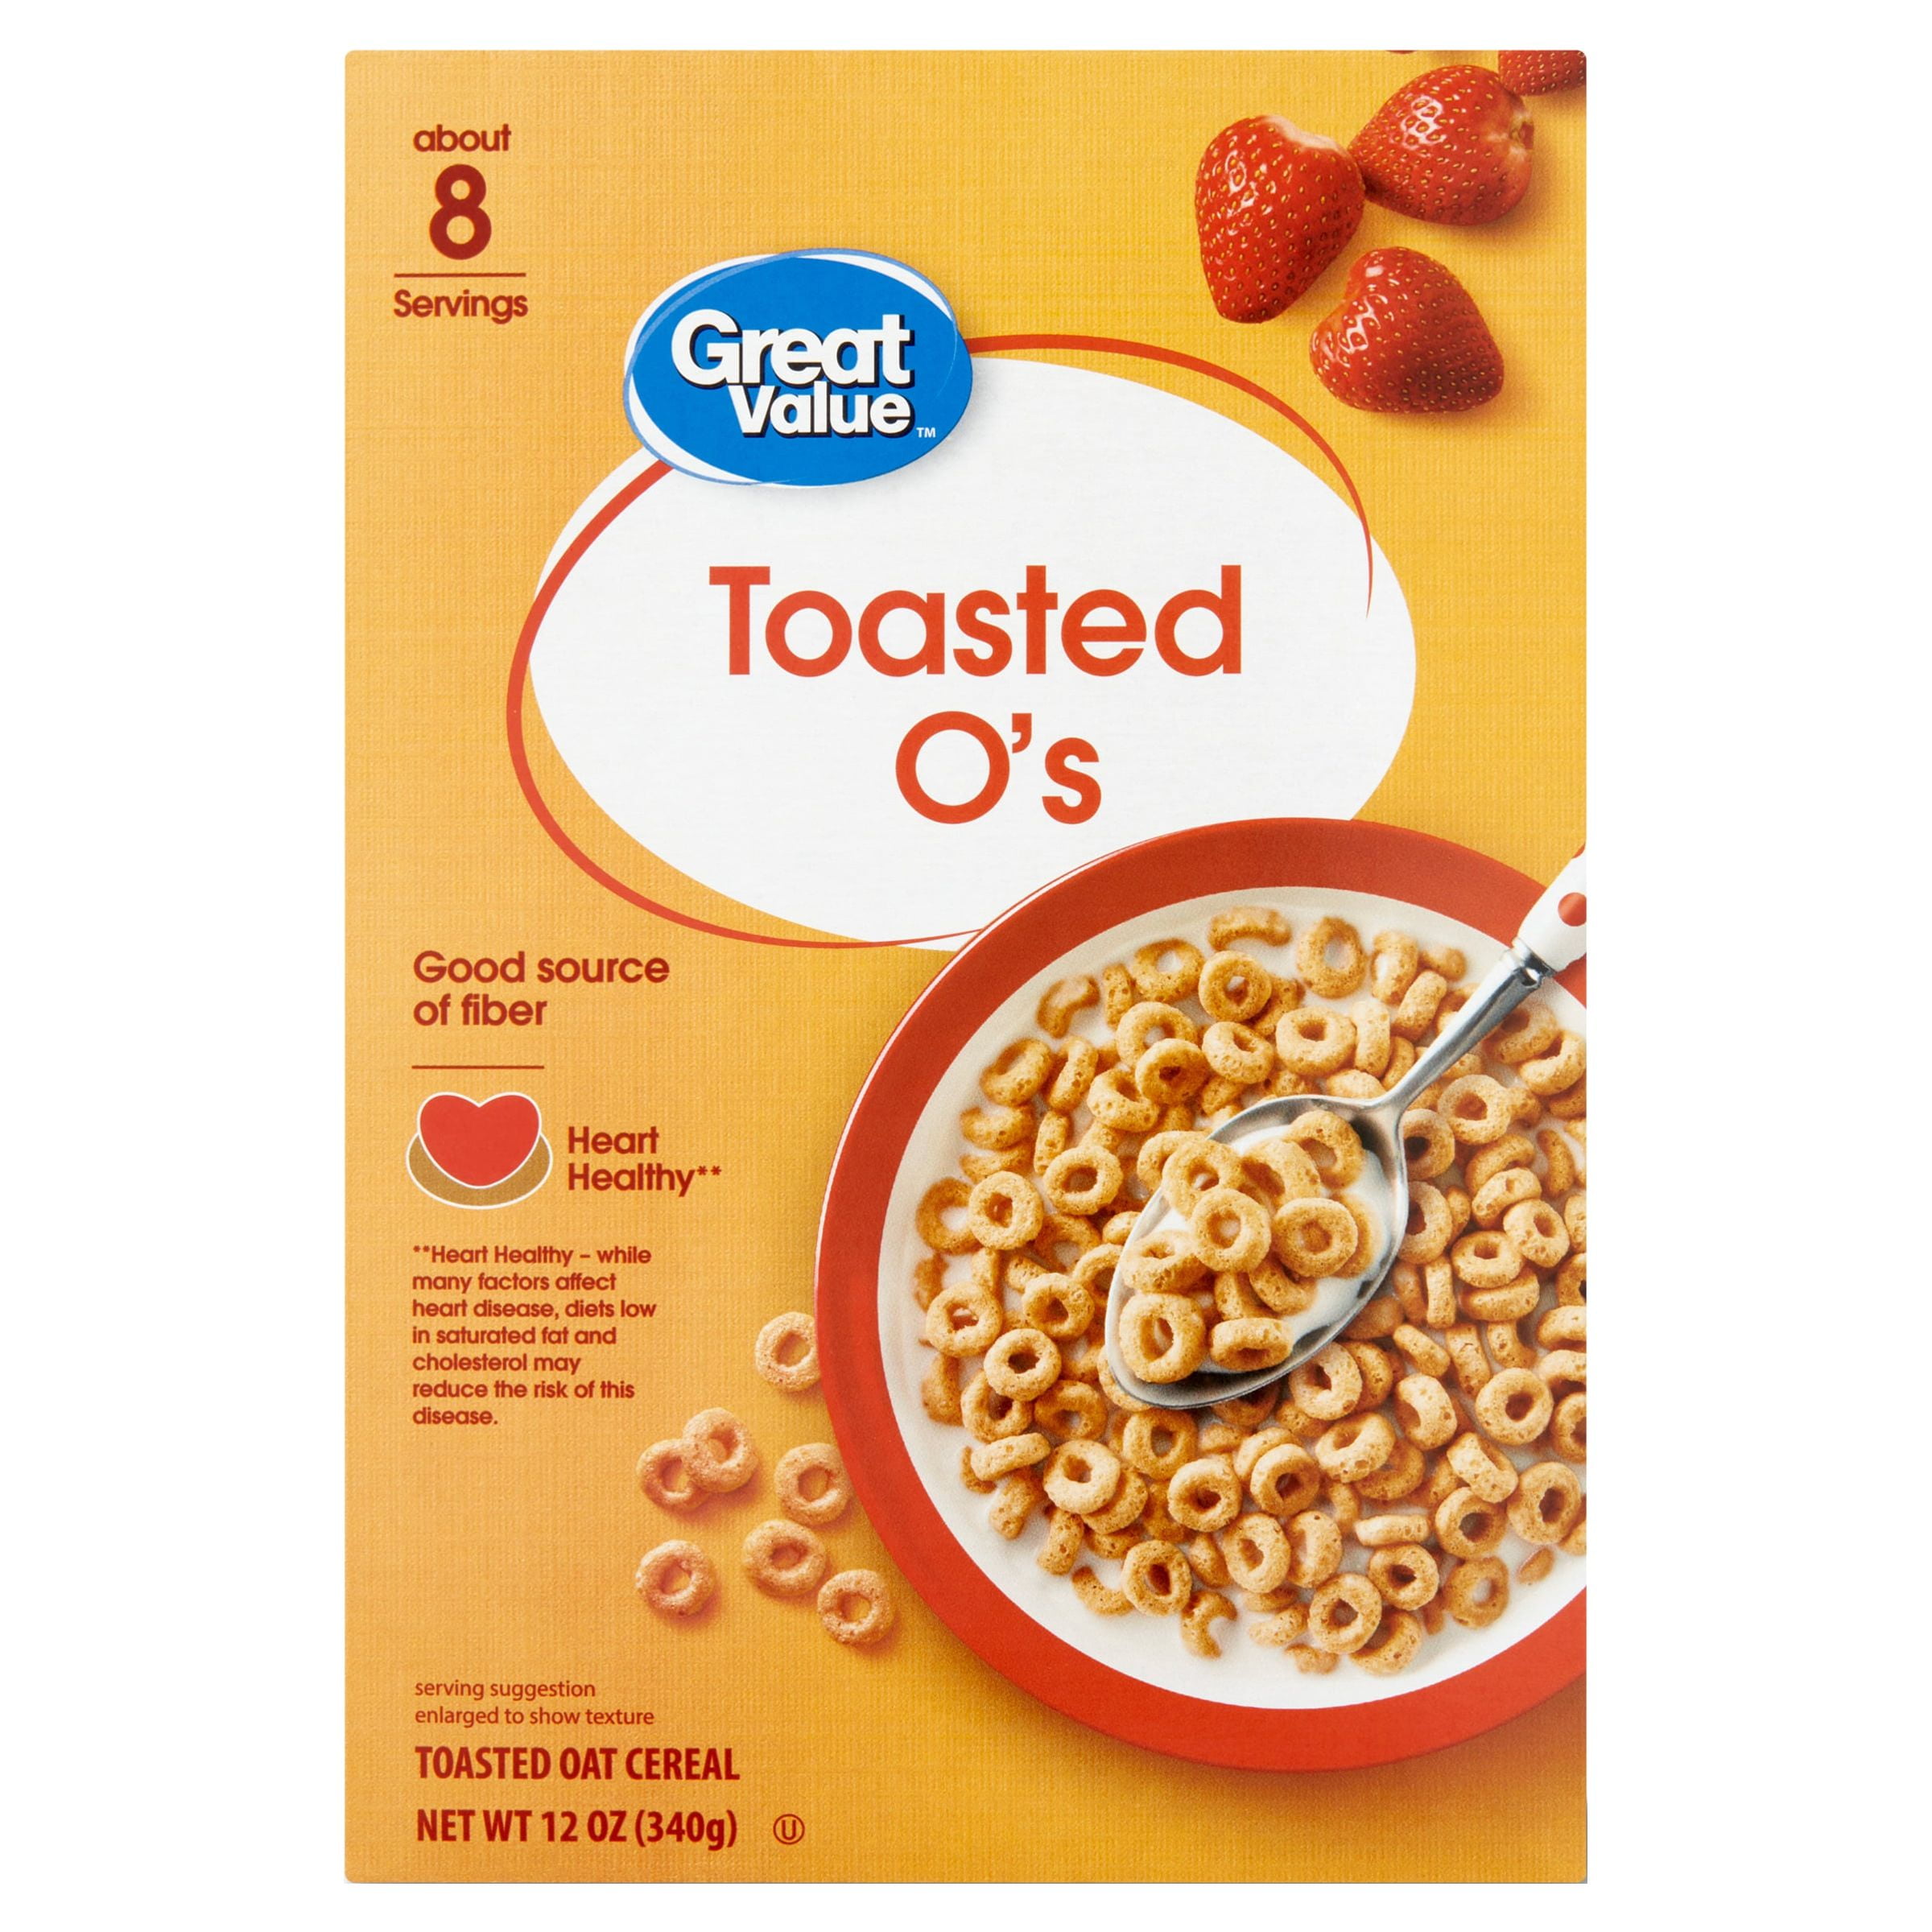 Cheapest Cereal: How to Save on Your Breakfast Staples